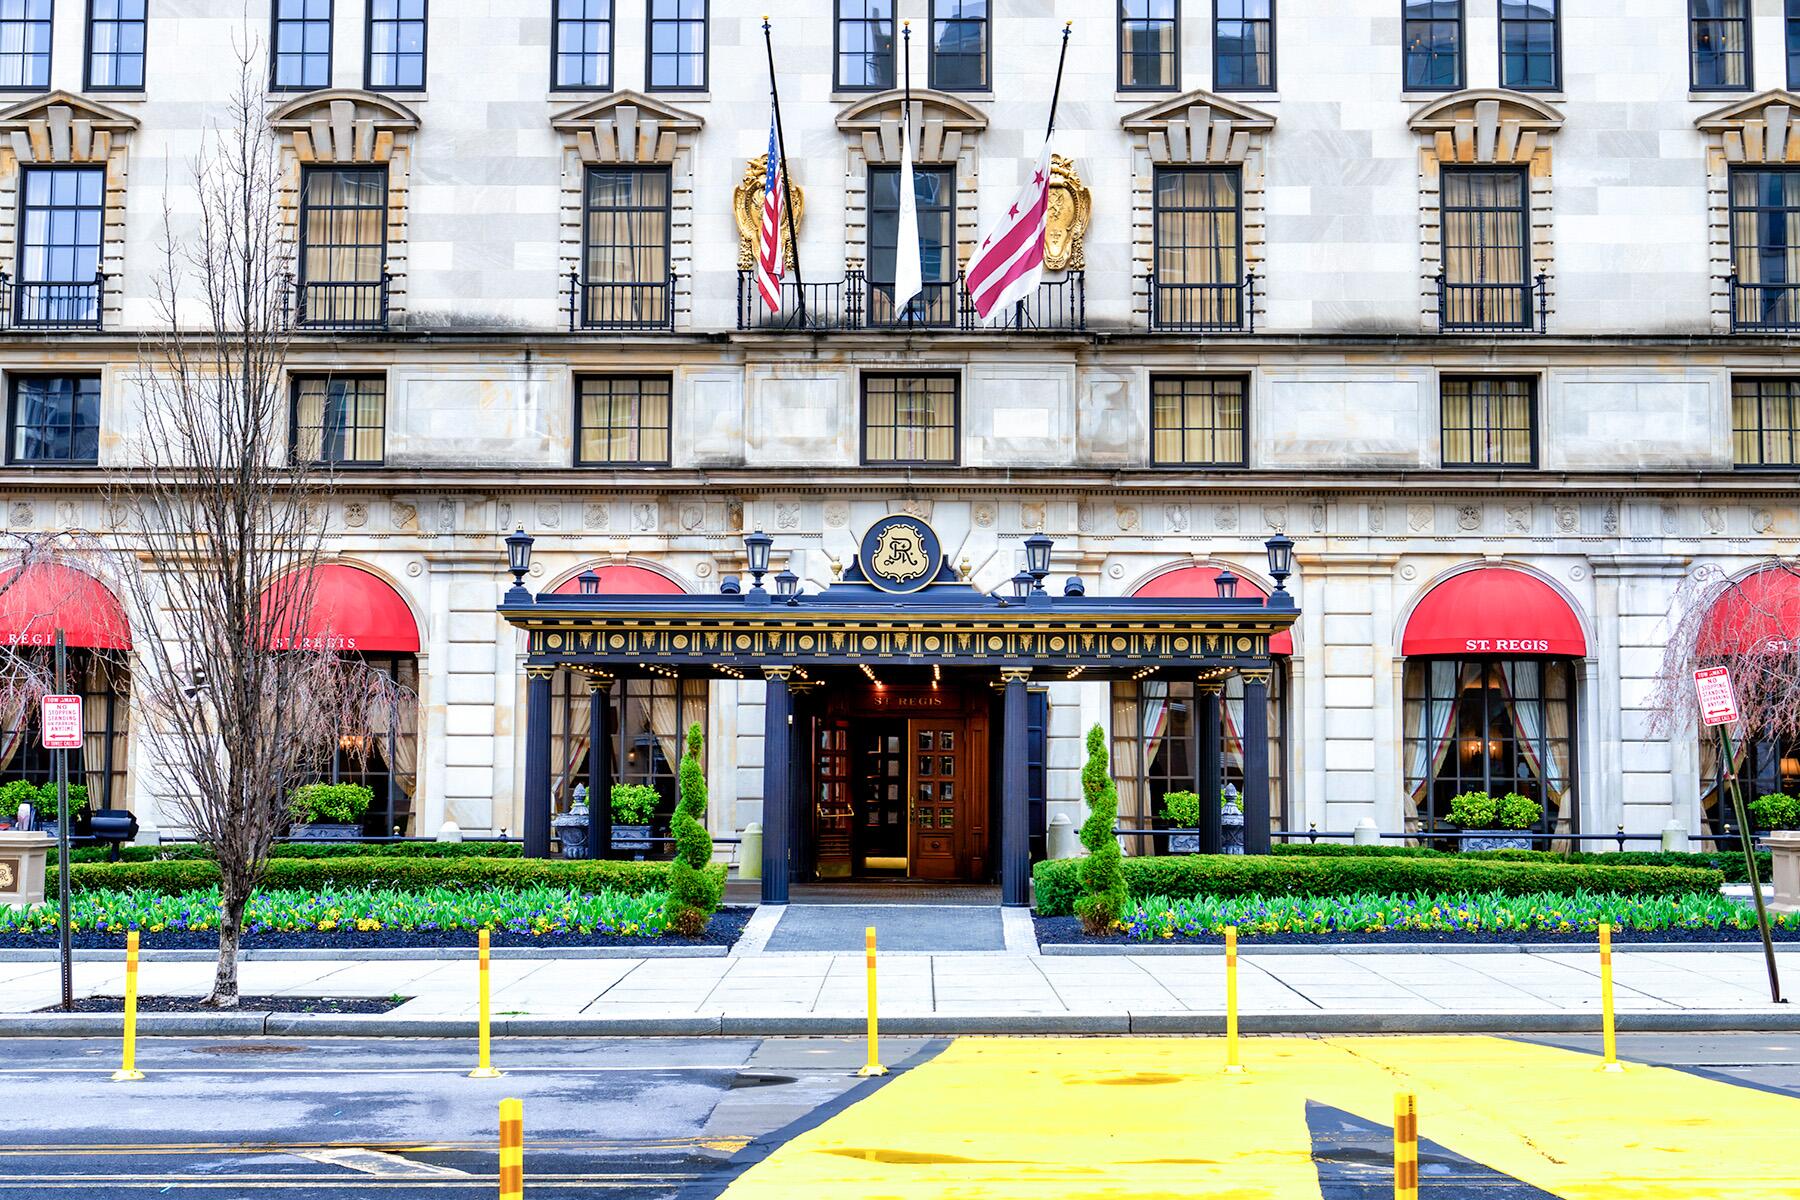 <a href='https://www.fodors.com/world/north-america/usa/washington-dc/experiences/news/photos/best-historic-hotels-in-washington-d-c#'>From &quot;The 10 Best Historic Hotels in Washington D.C.: The St. Regis Washington, D.C.&quot;</a>